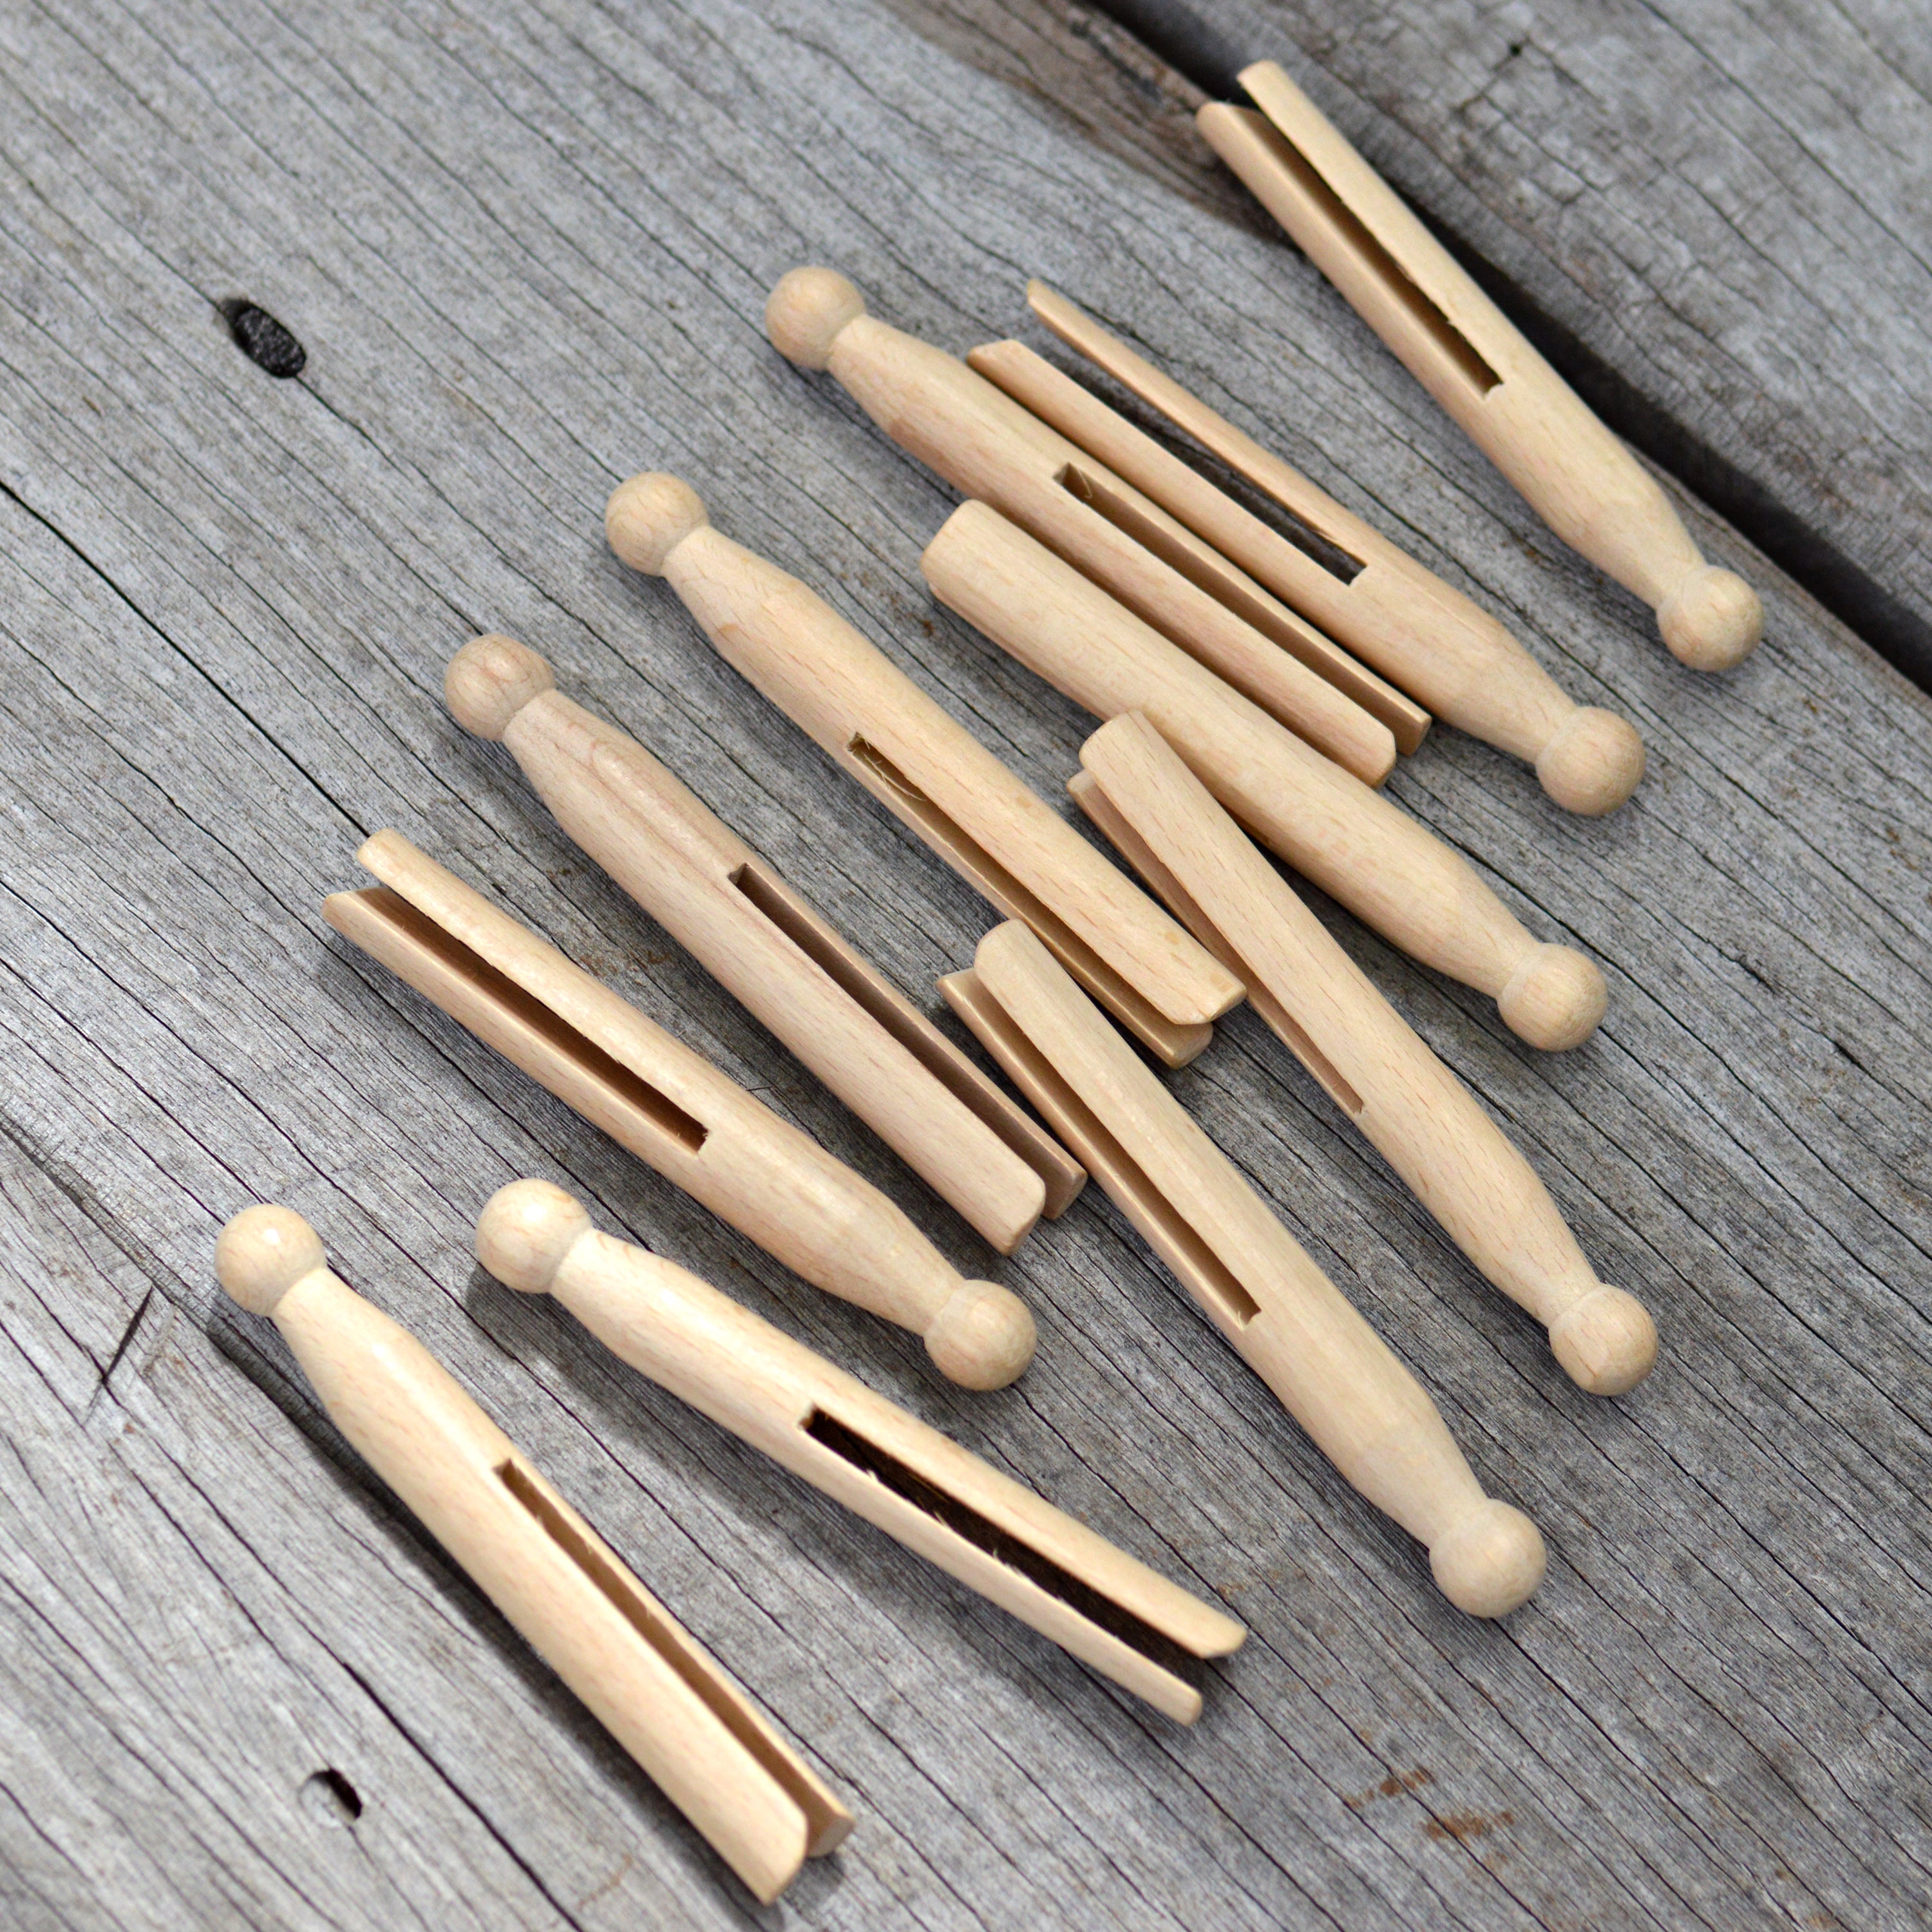 Wooden Clothes Pegs by Redecker